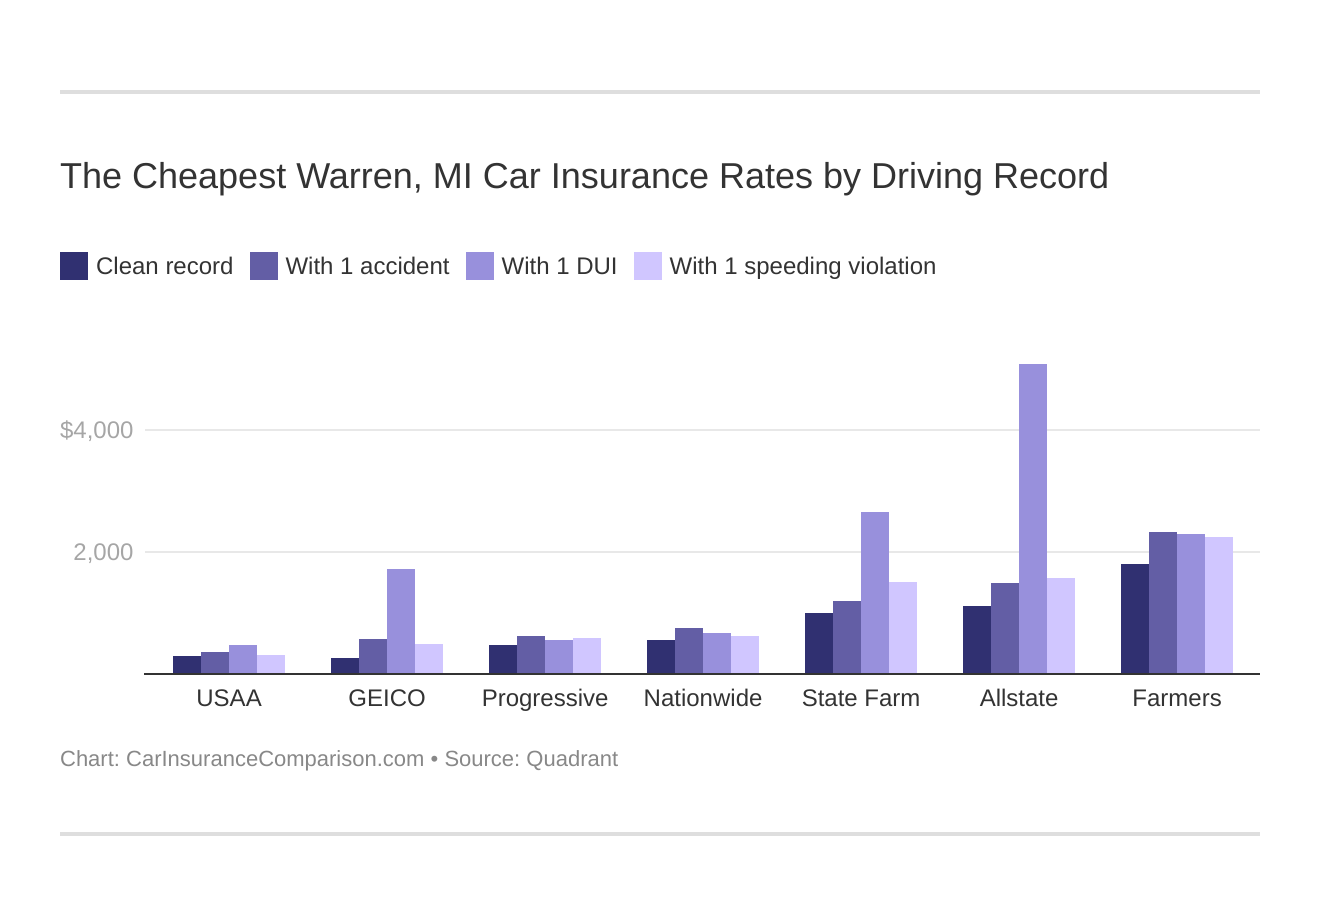 The Cheapest Warren, MI Car Insurance Rates by Driving Record